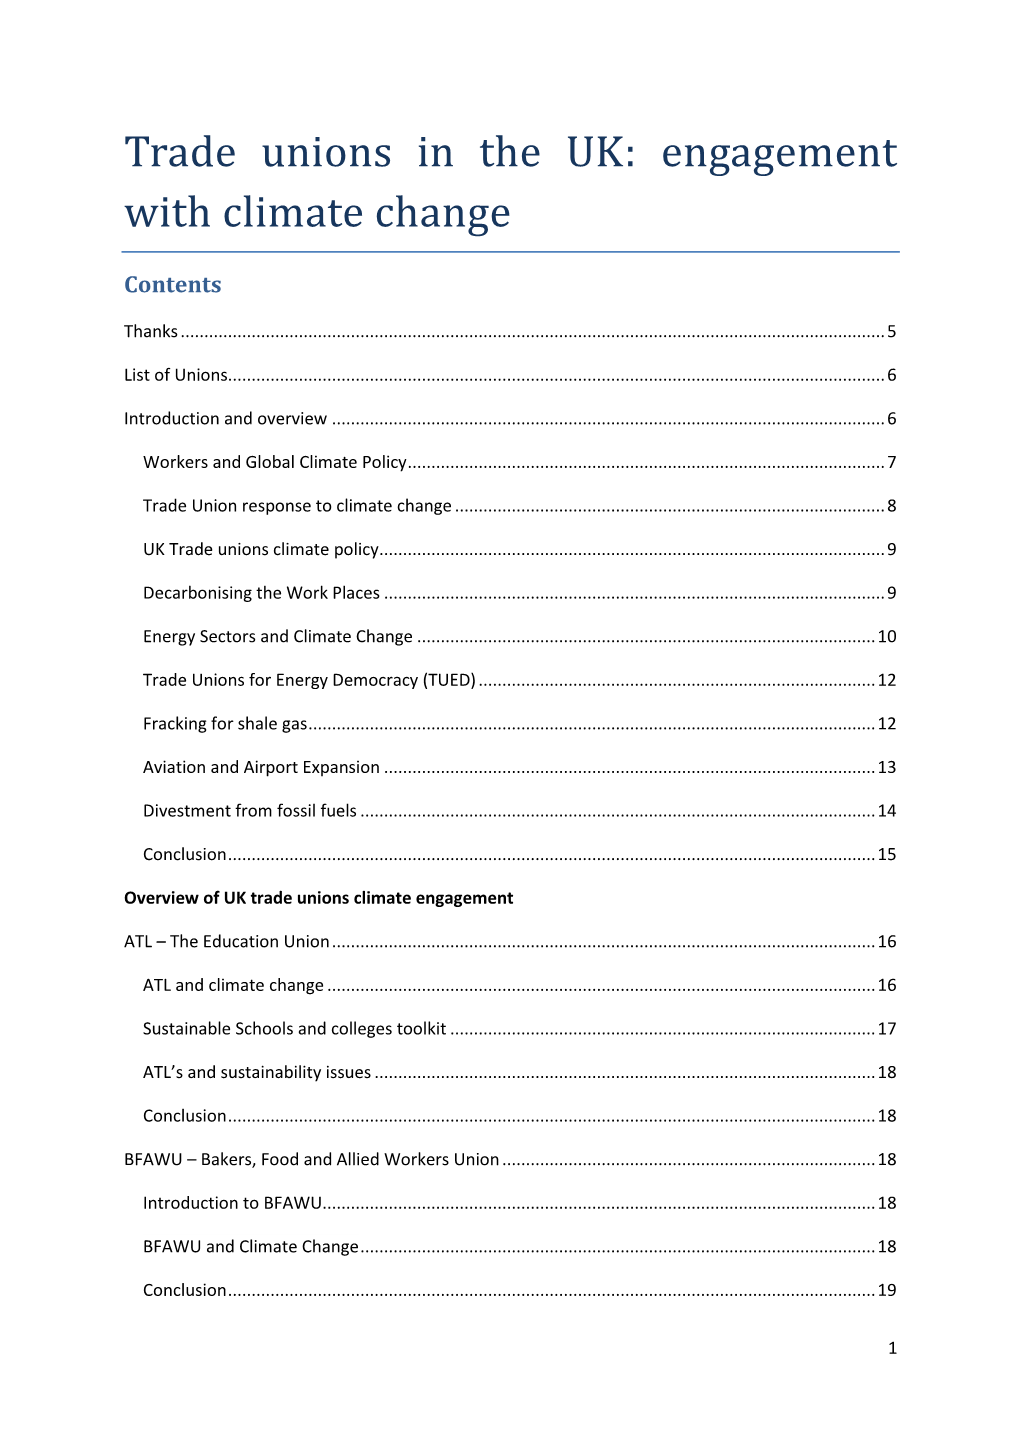 Trade Unions in the UK: Engagement with Climate Change